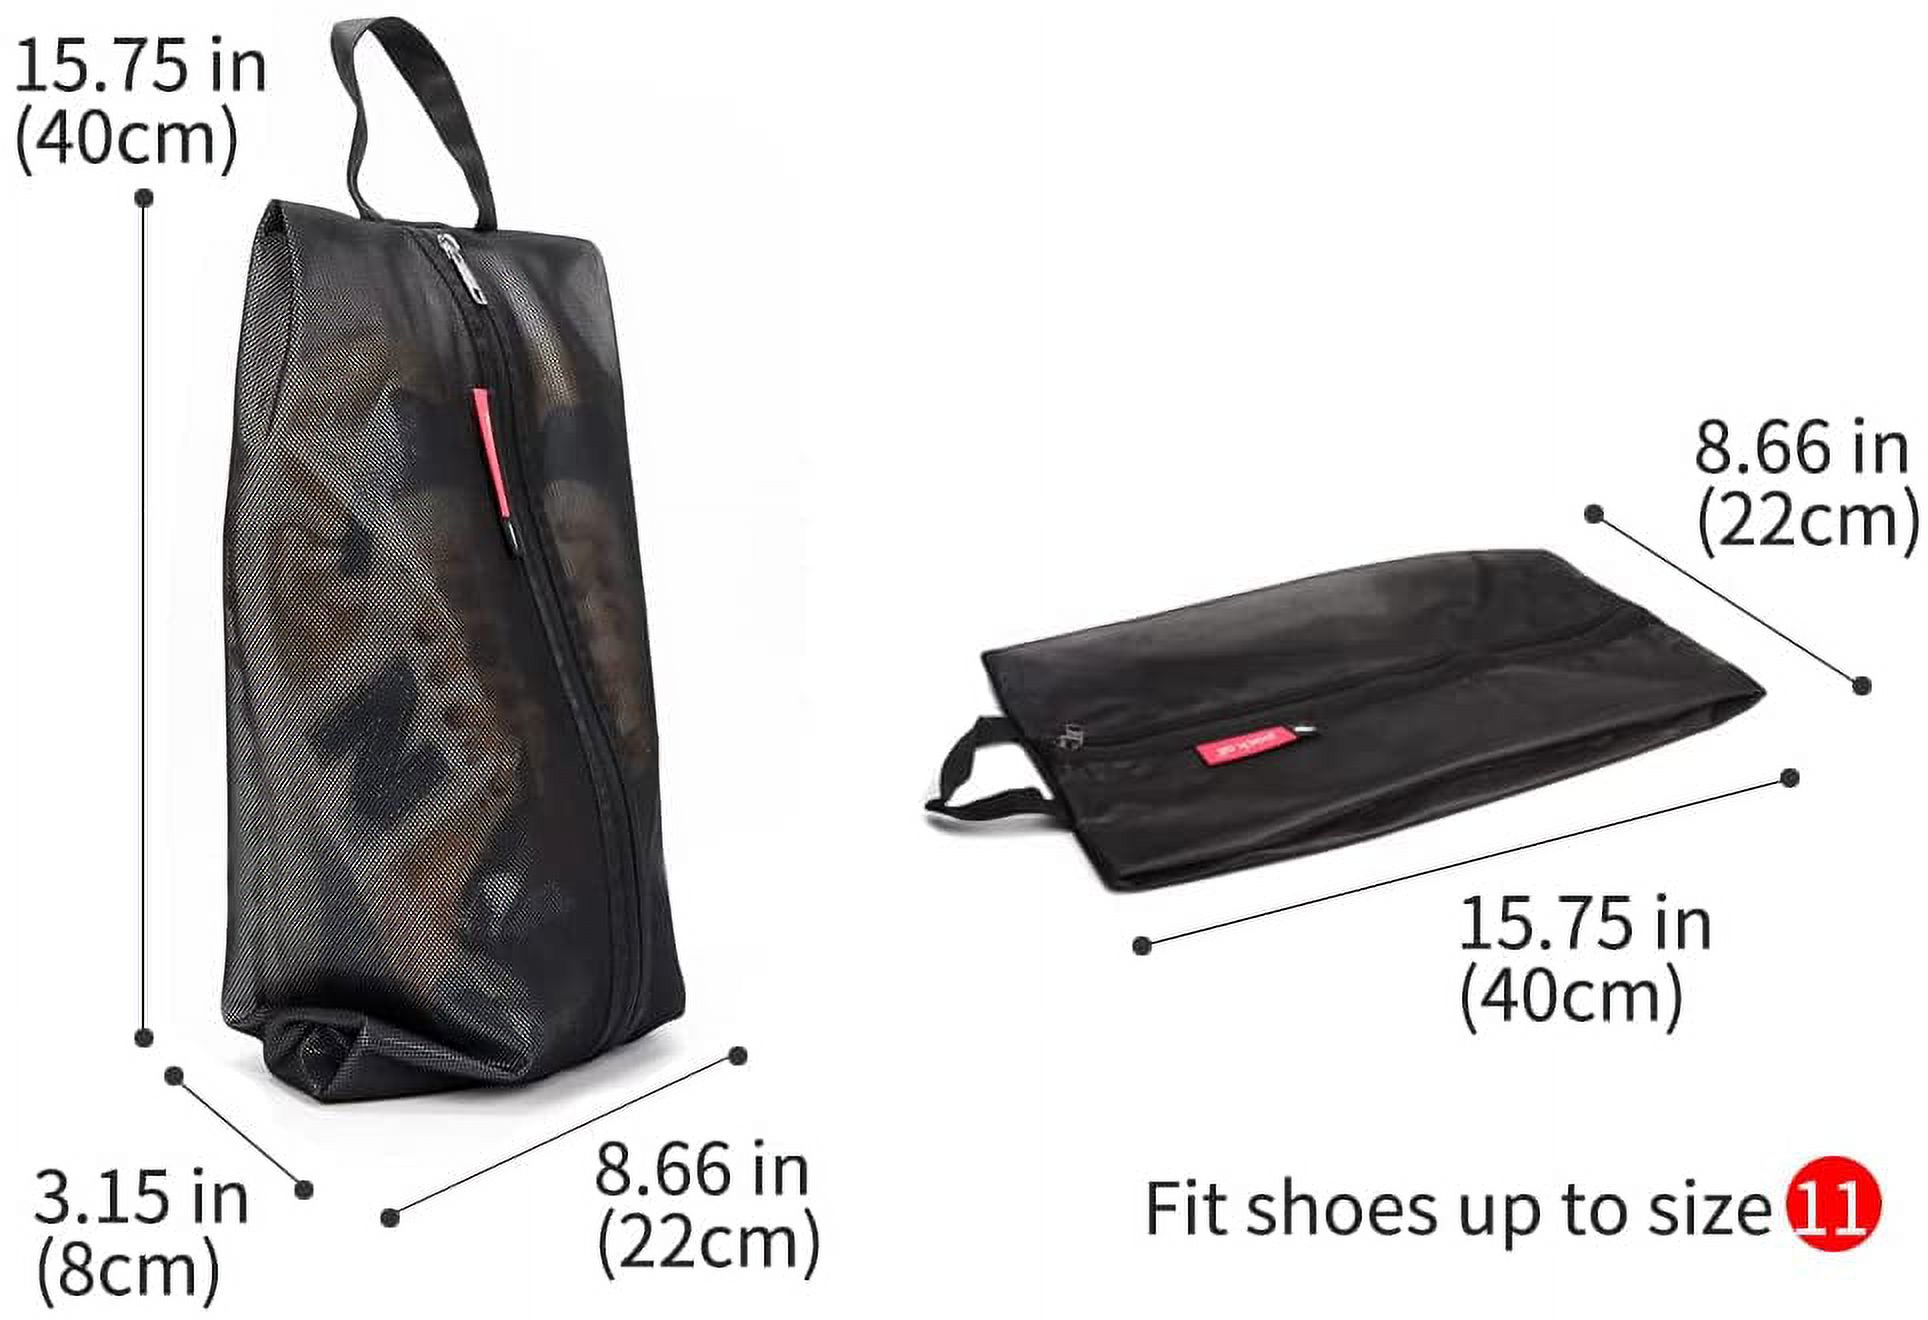 pack all Water Resistant Travel Shoe Bags,Storage Organizer Pouch with Zipper(Black) - image 5 of 7